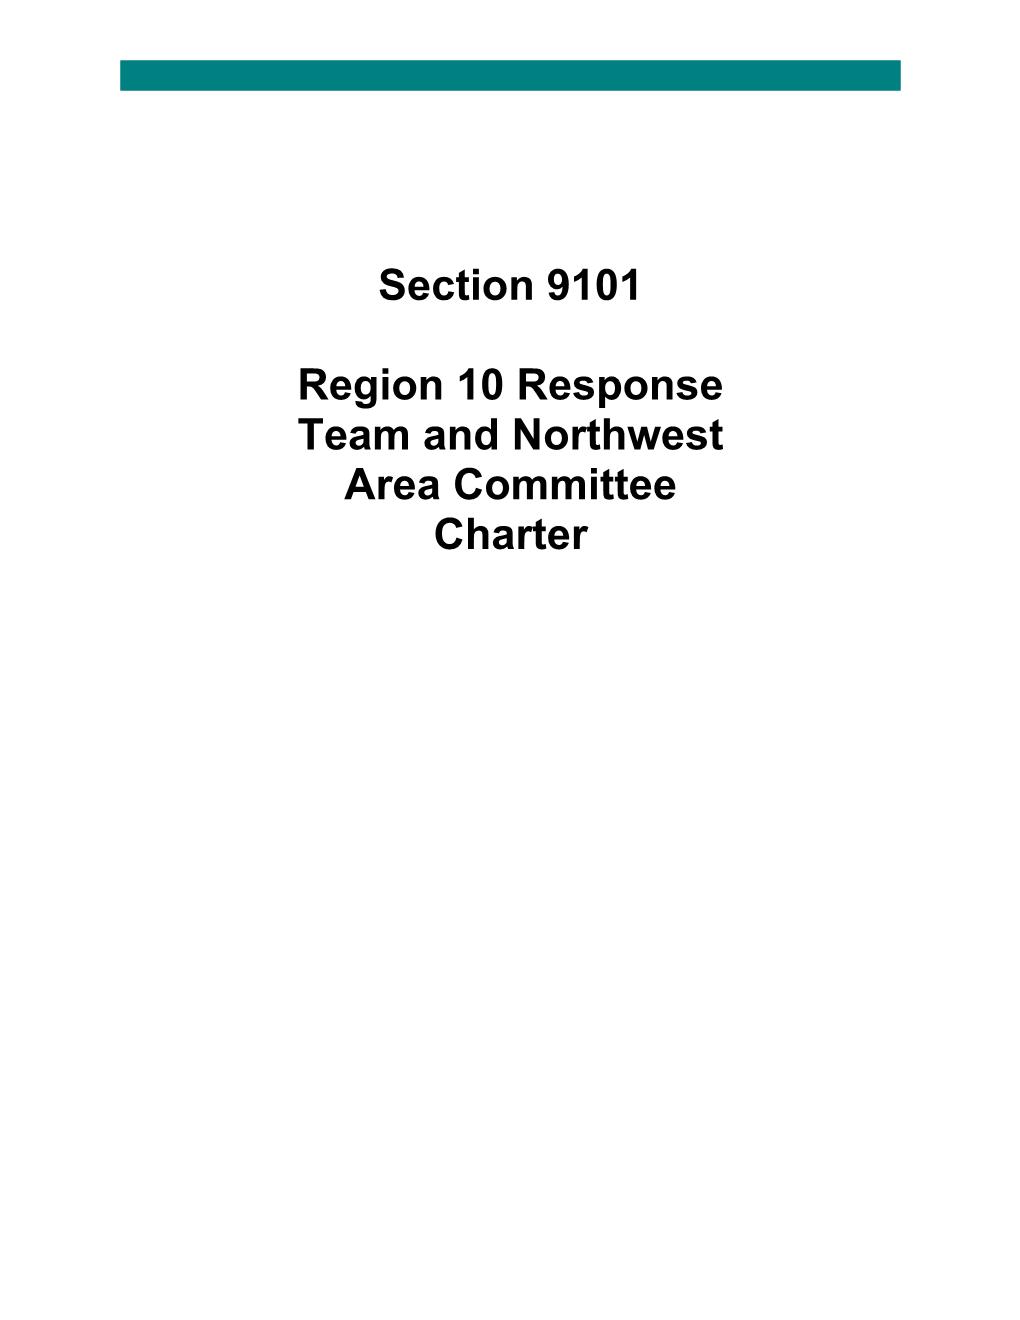 Section 9101 Region 10 Response Team and Northwest Area Committee Charter